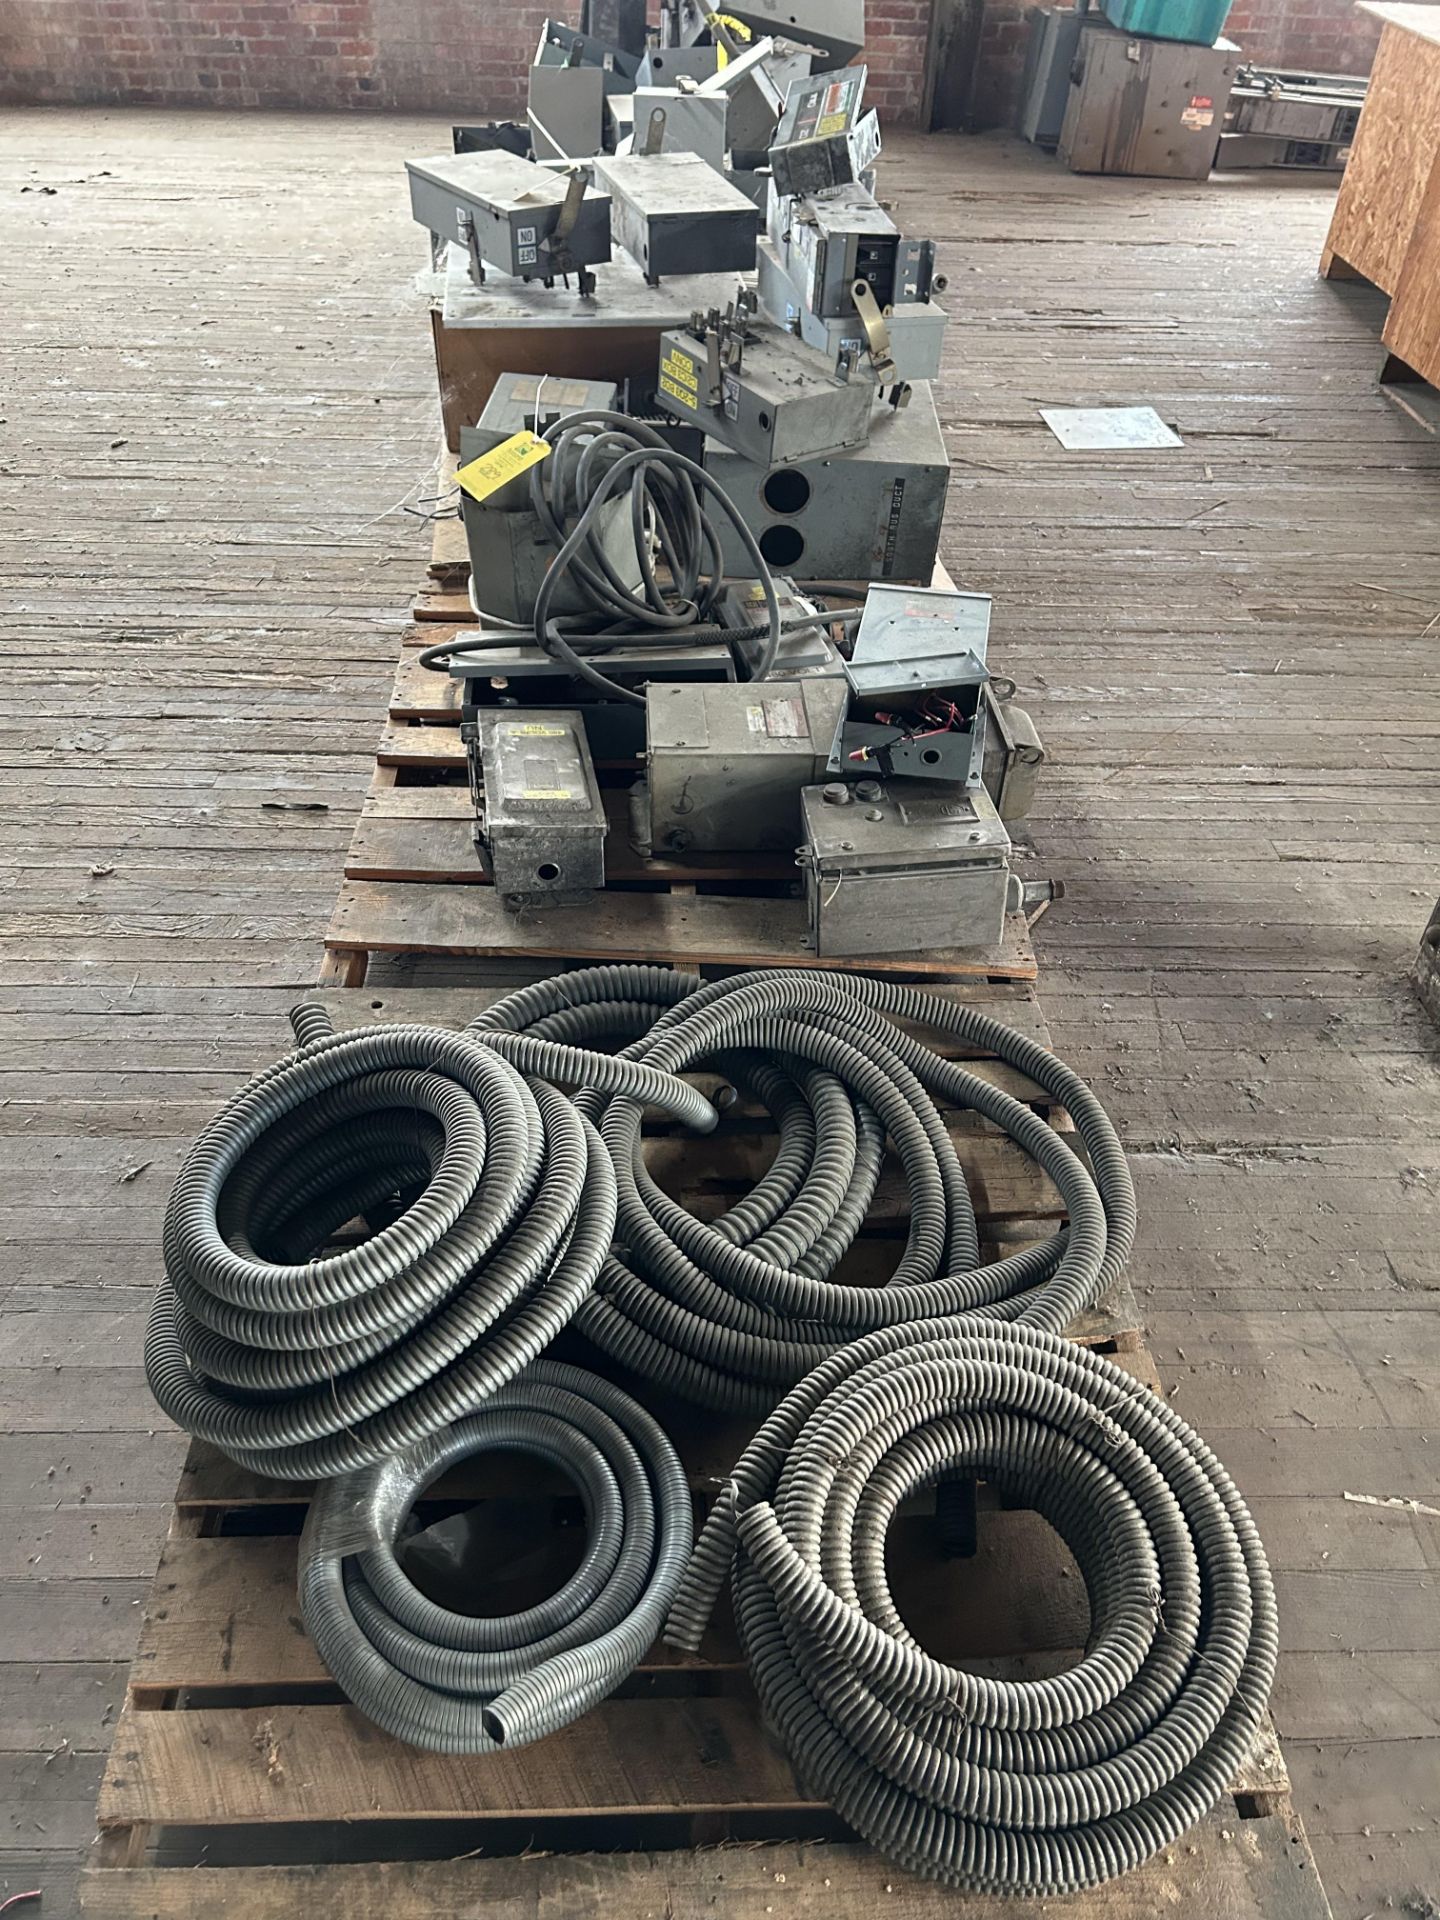 Spare Parts & Eletrical Components, Rigging/ Removal Fee - $325 - Image 9 of 12